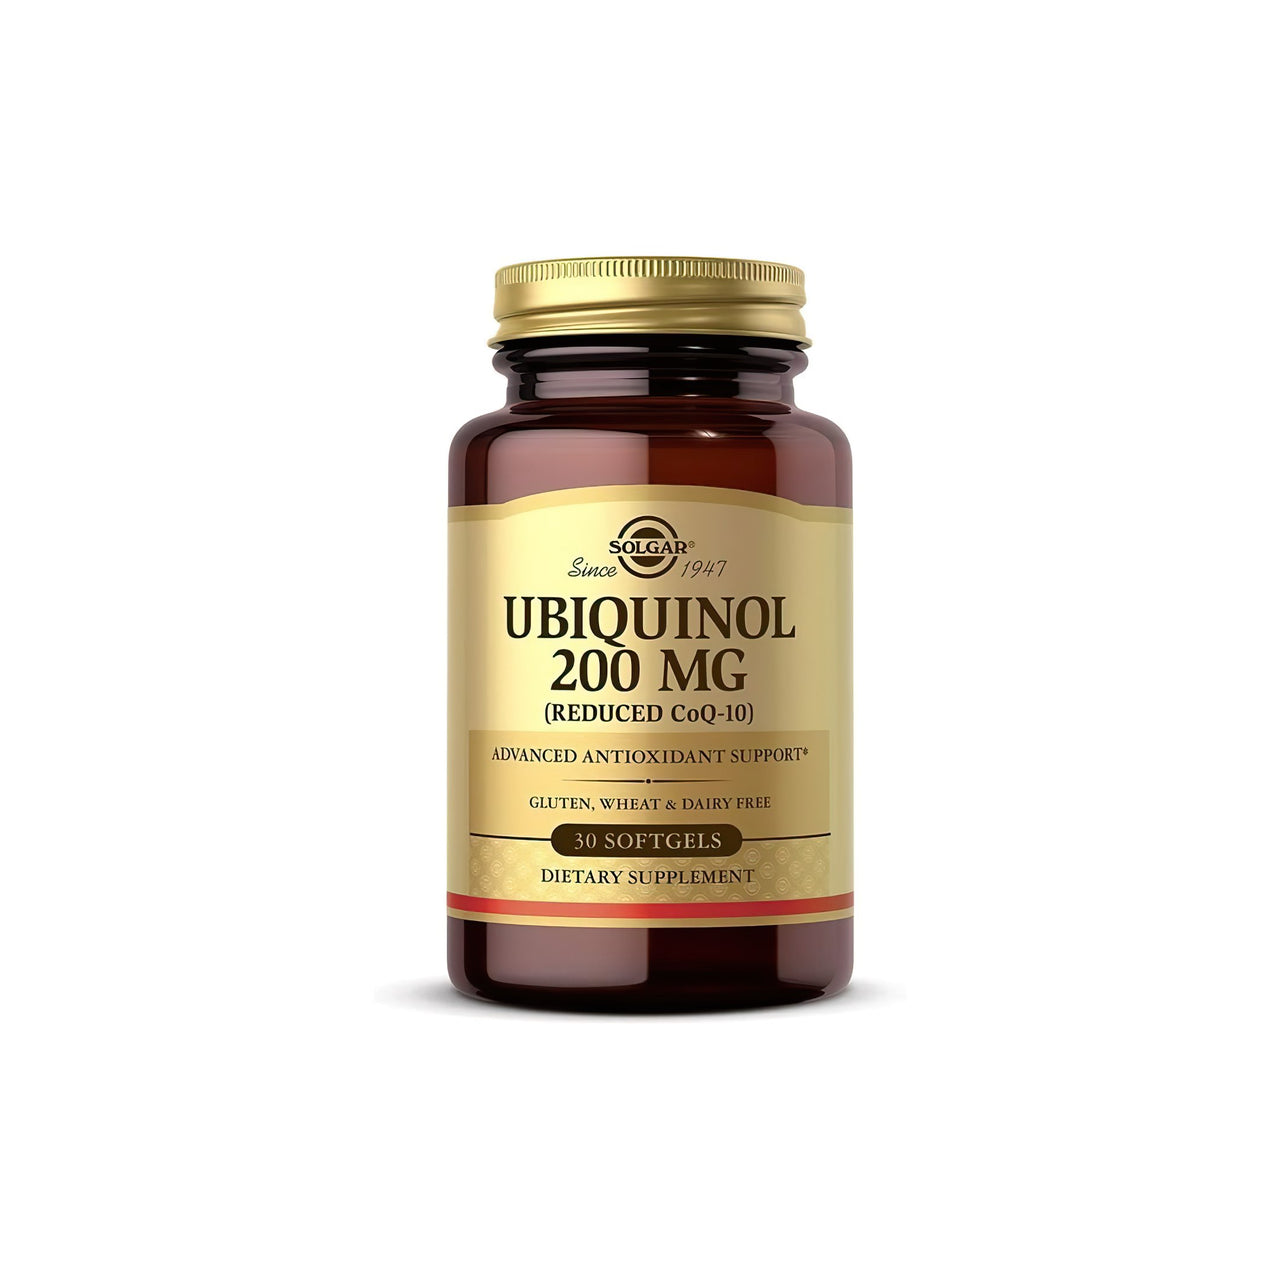 Solgar Ubiquinol 200mg (Reduced CoQ-10) 30 Softgels capsules on a white background. Experience the benefits of CoQ10 with this powerful Solgar product.